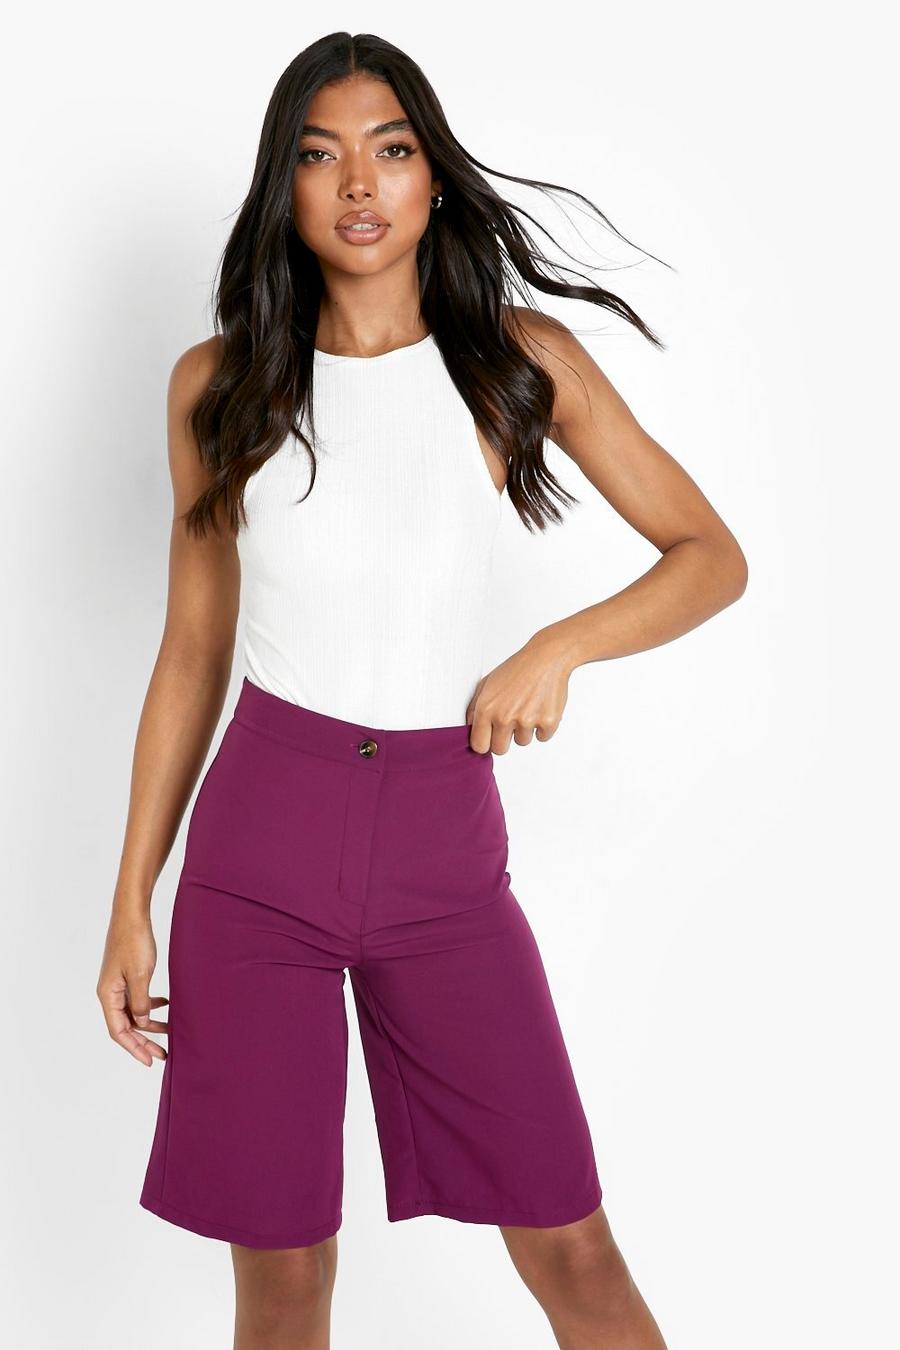 Orchid purple Tall Getailleerde City Shorts